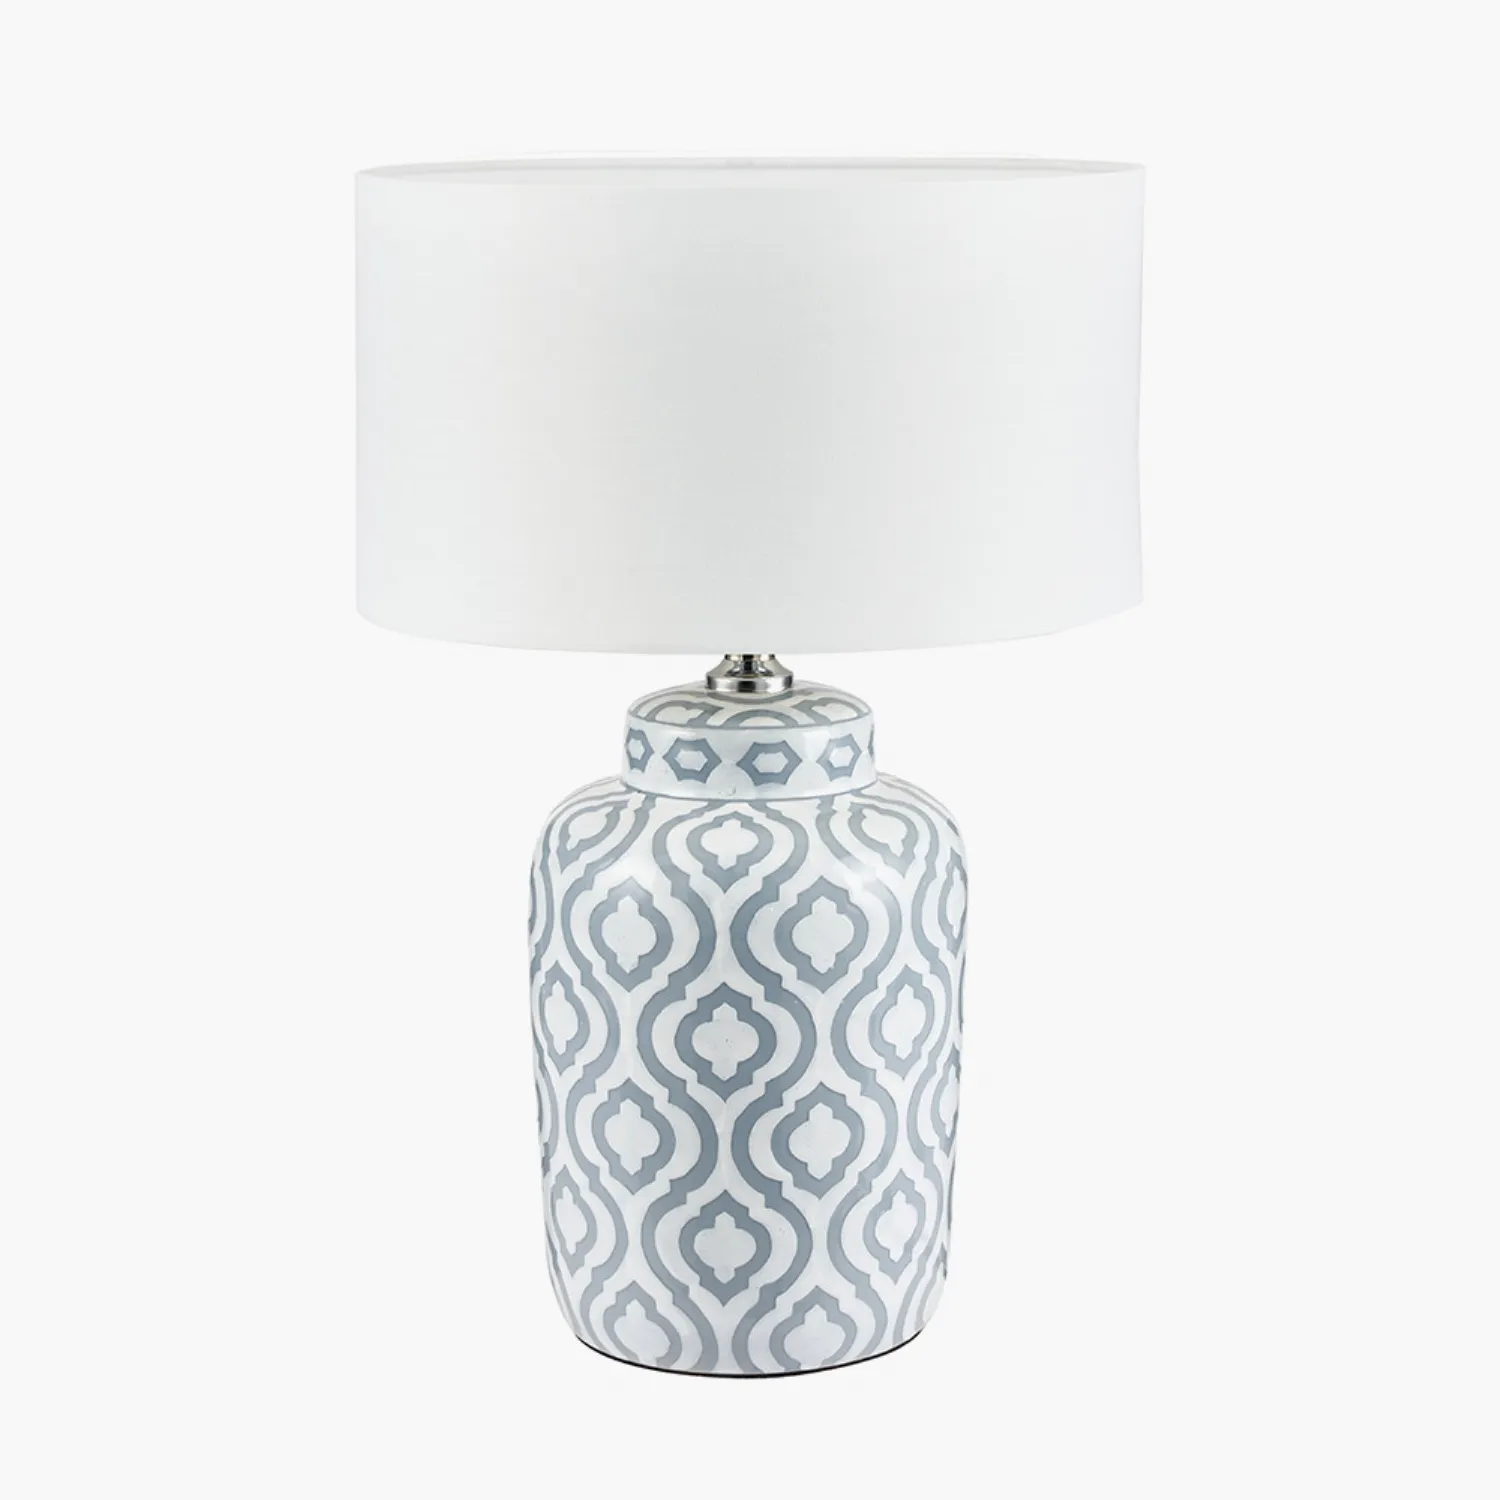 Grey and White Pattern Ceramic Desk Table Lamp